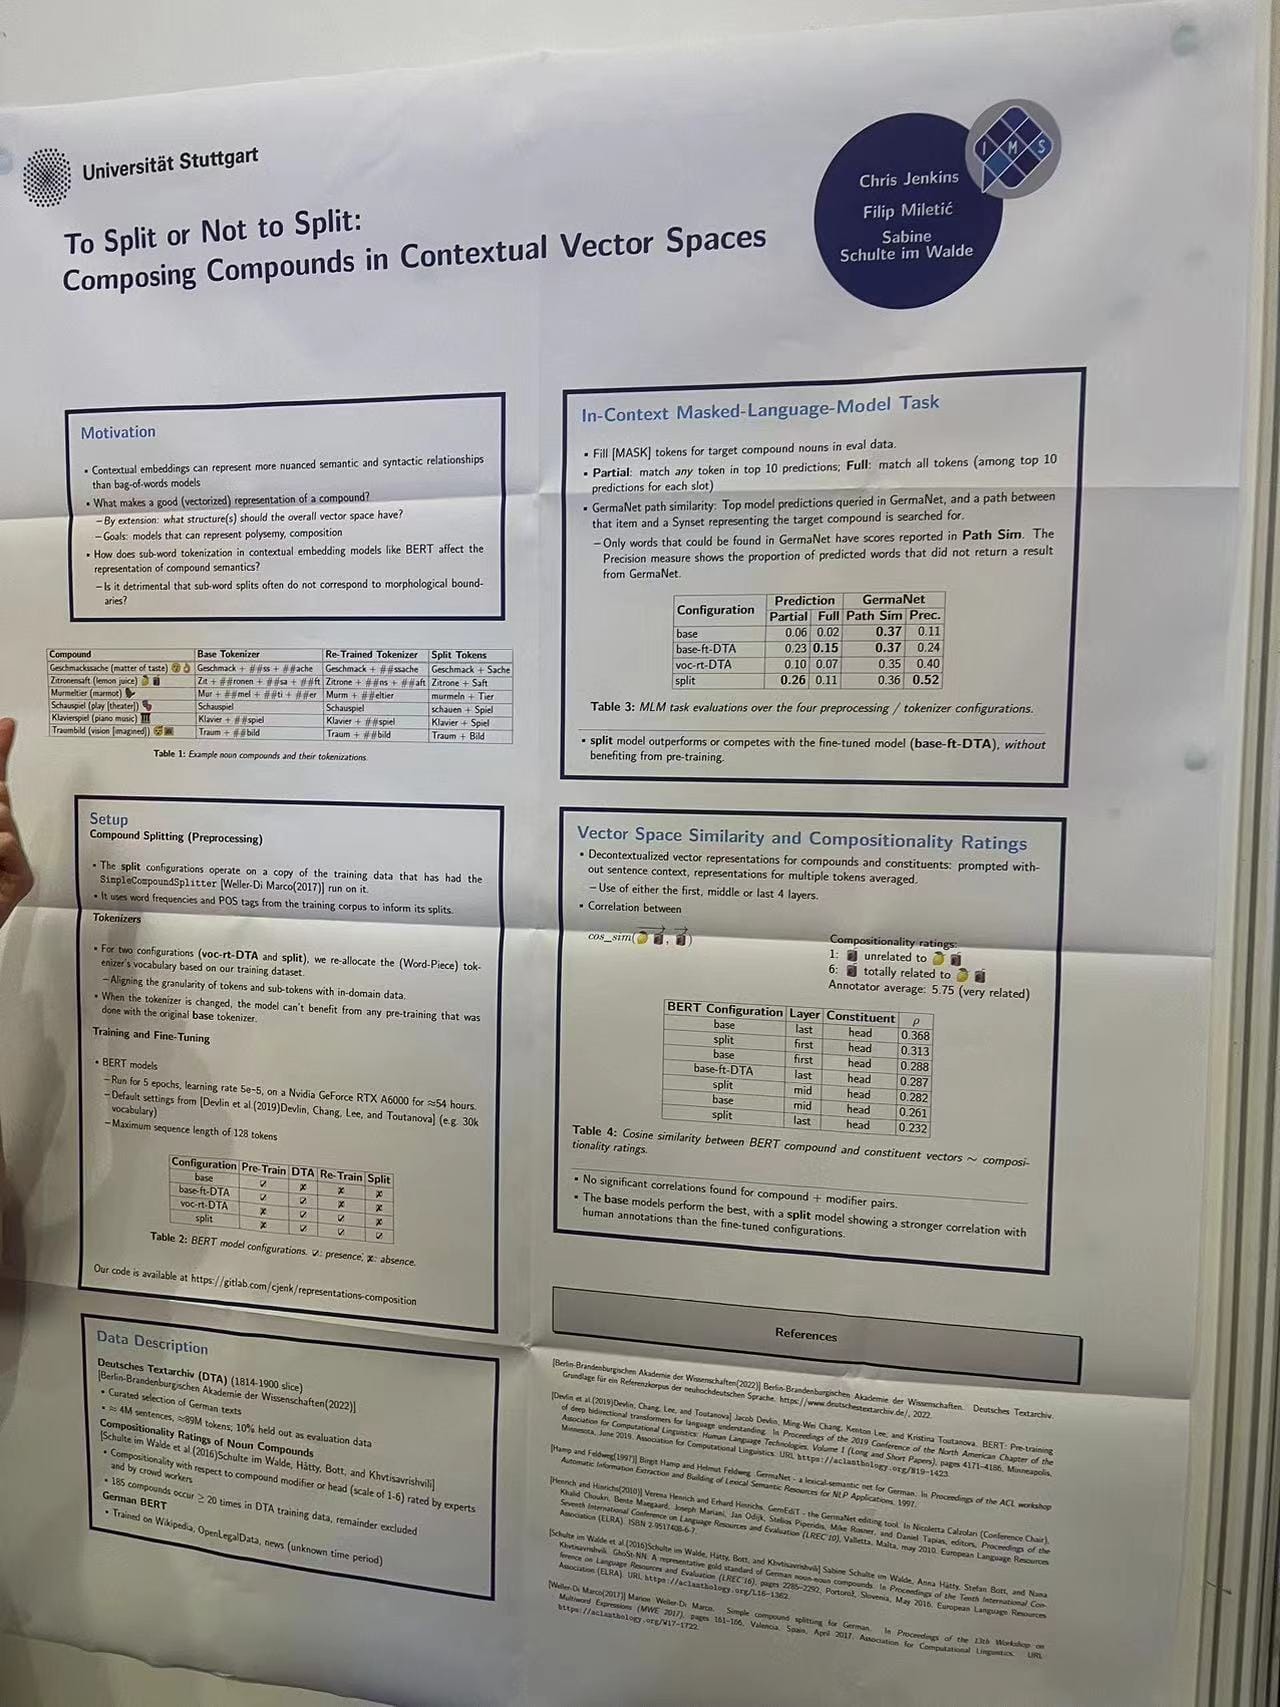 Academic poster titled "To Split or Not to Split," on vector spaces with graphs and tables, by authors including Chris Jenkins at a conference